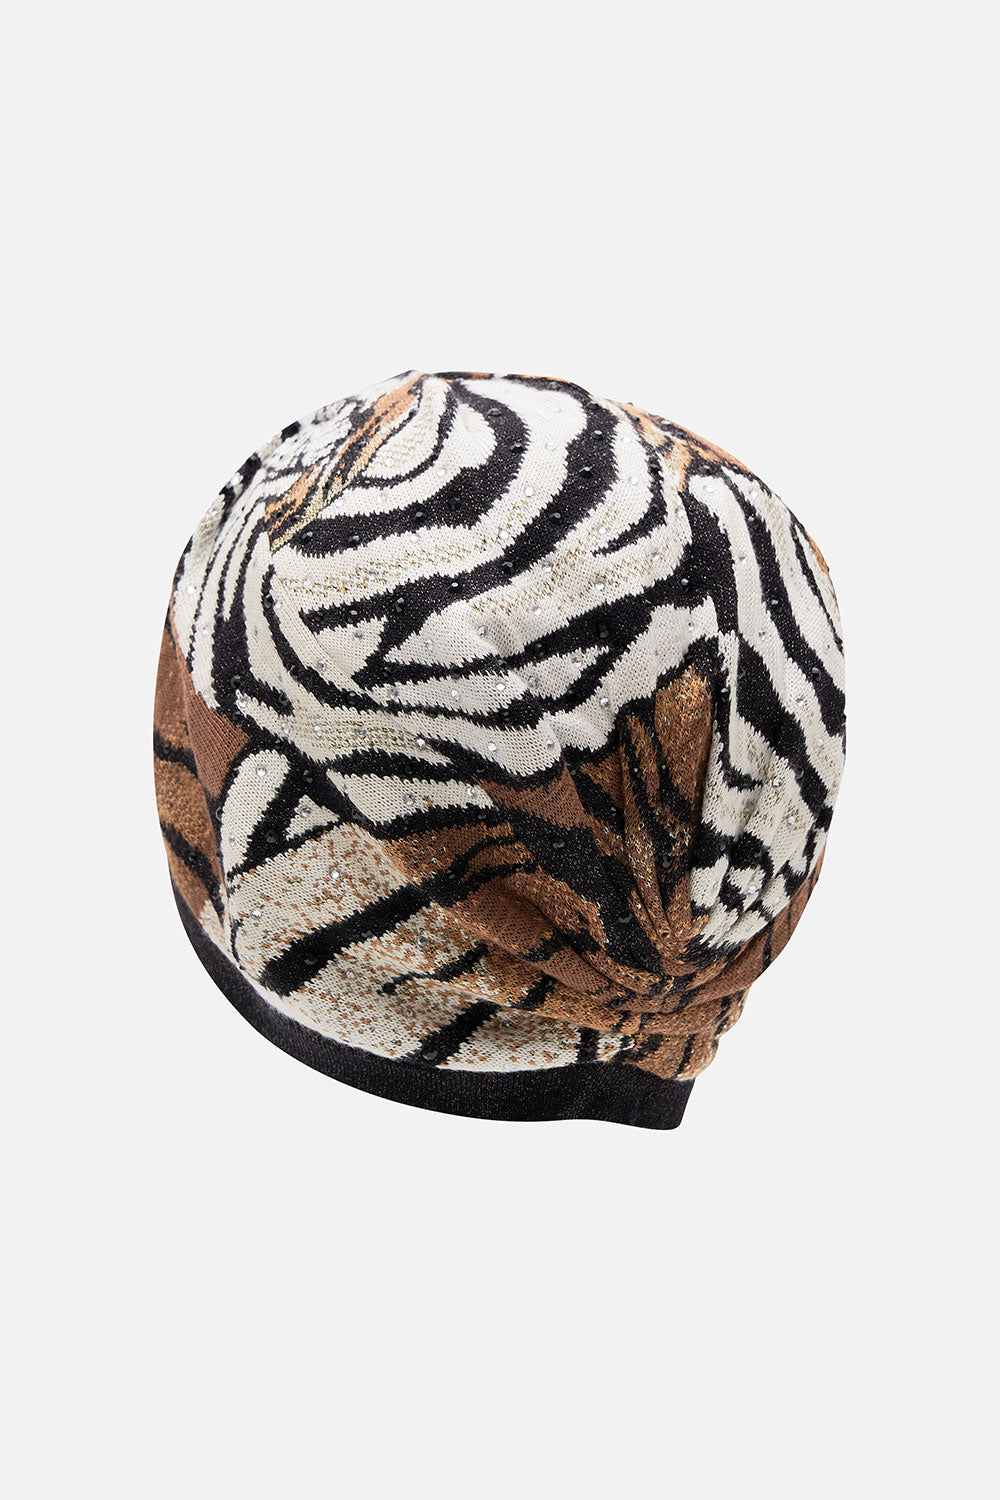 KNOT FRONT TURBAN WHATS NEW PUSSYCAT